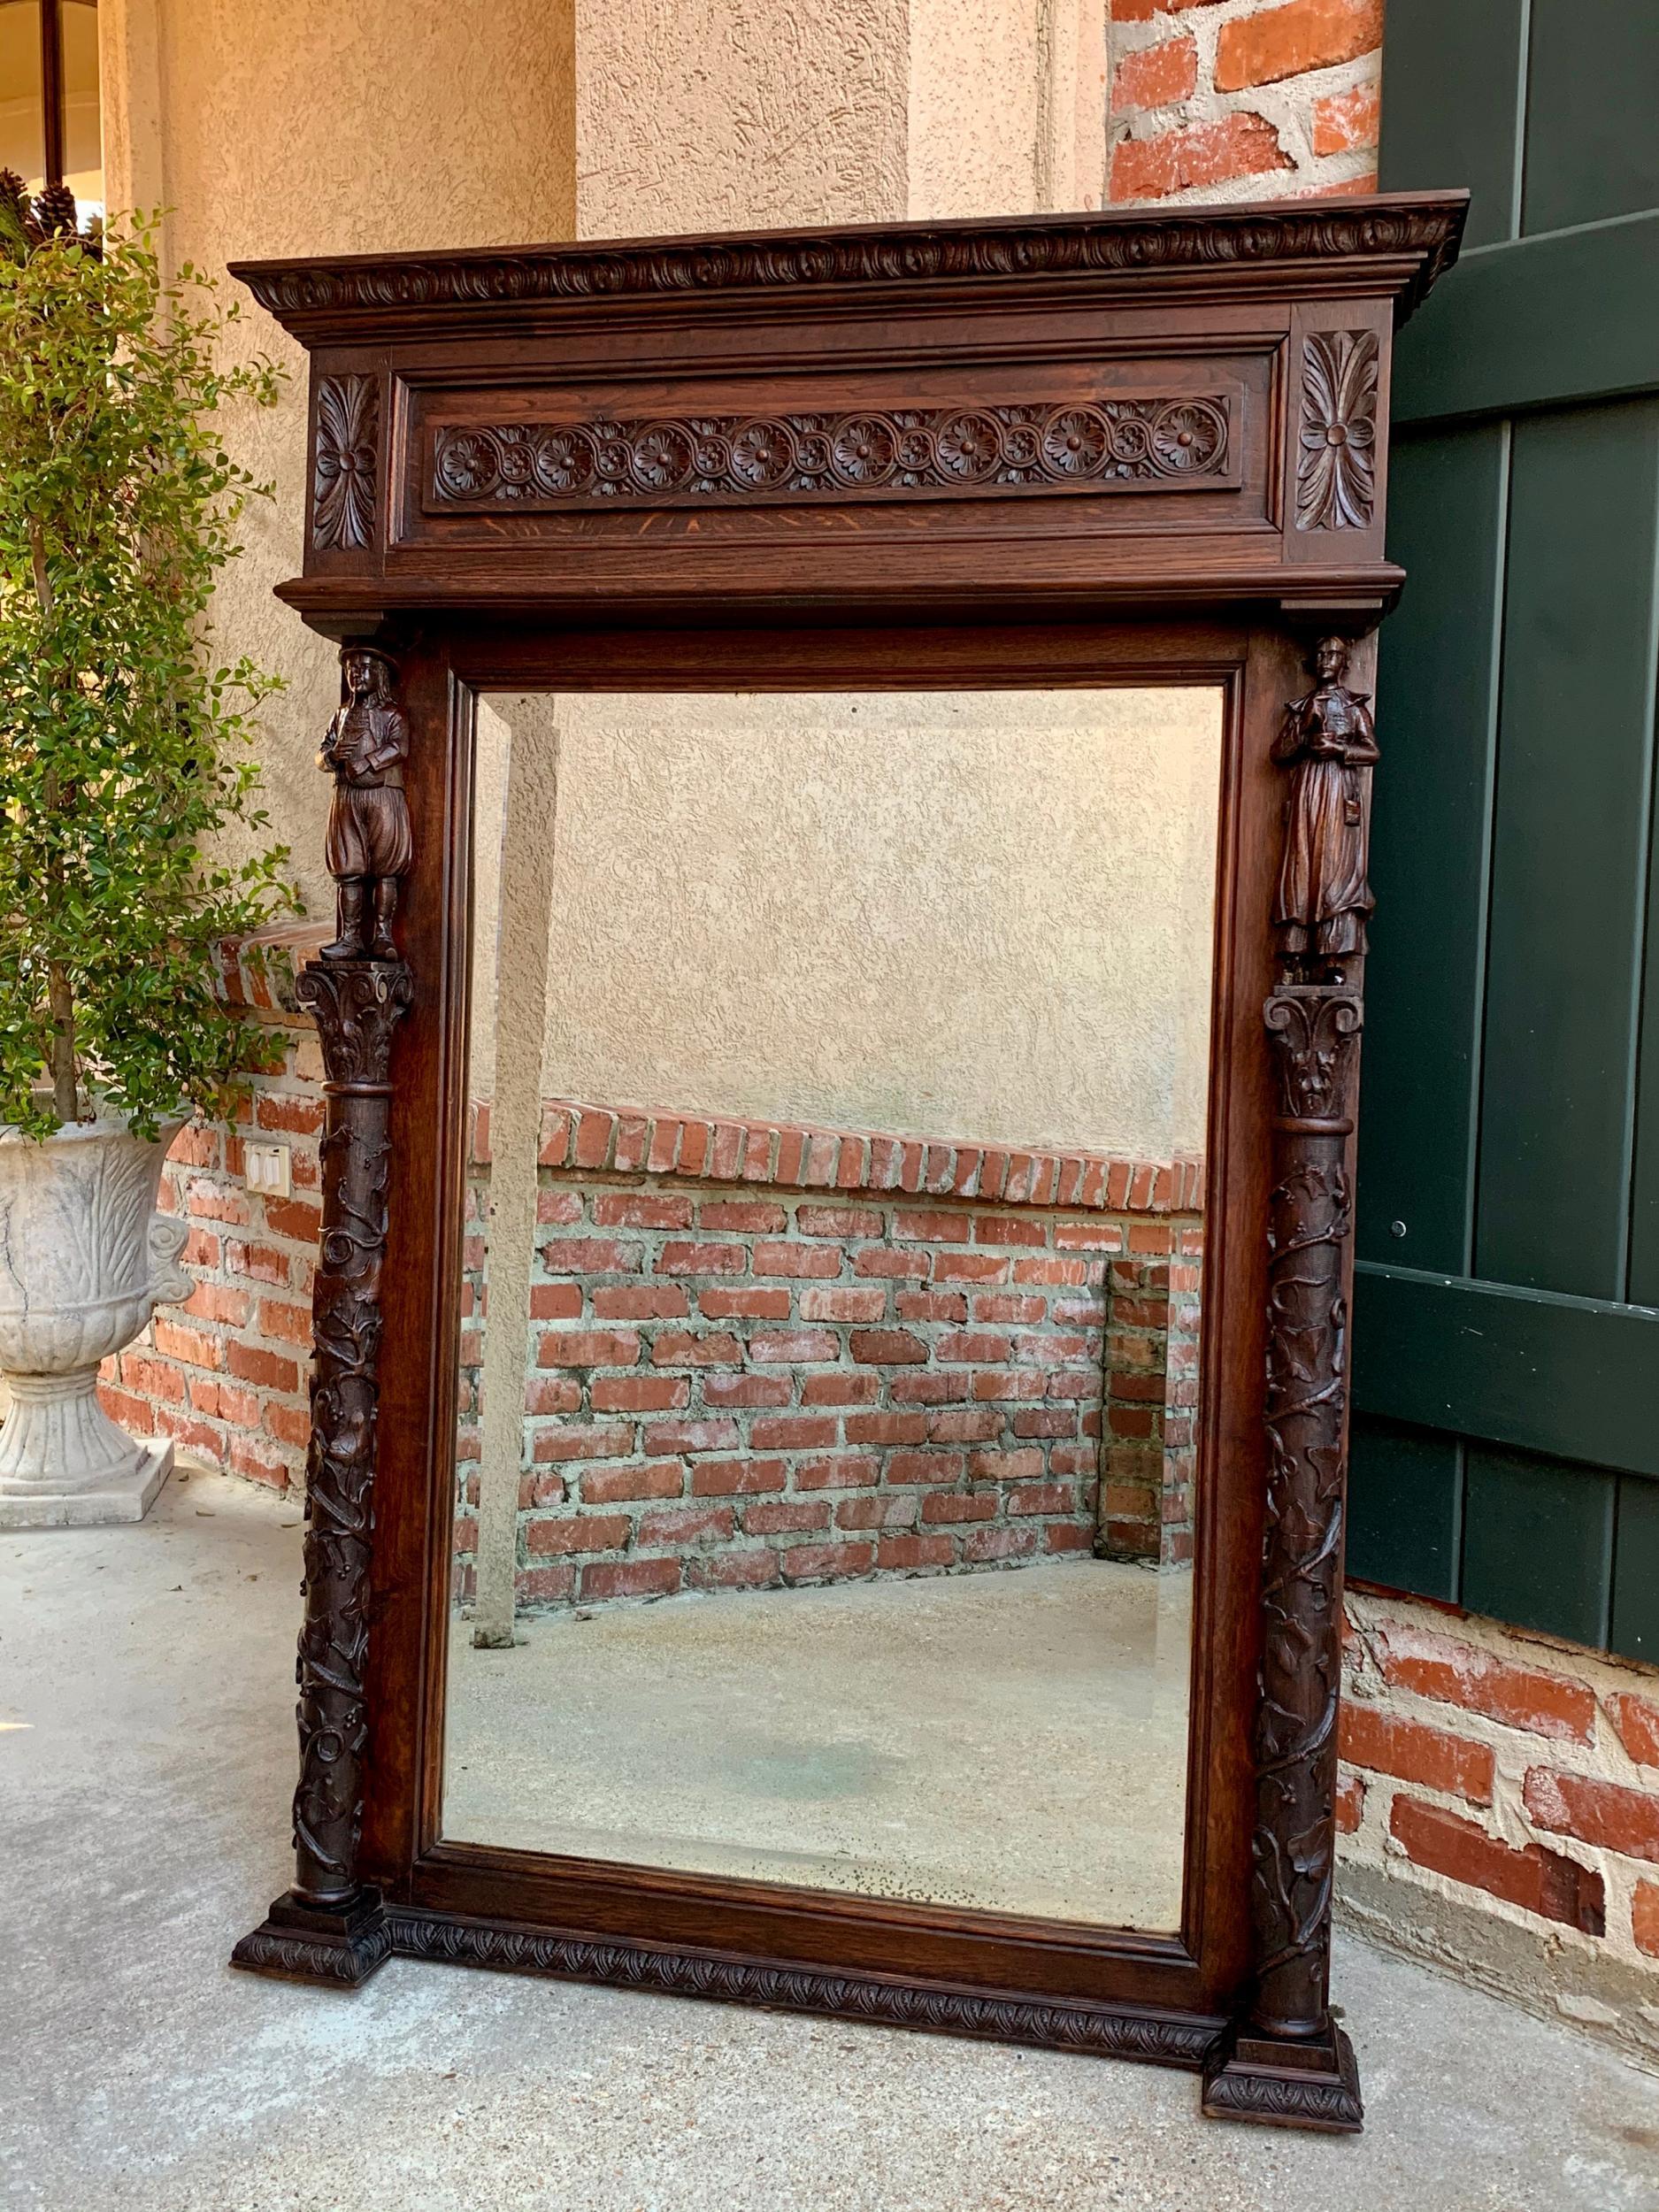 Antique French carved chestnut pier mantel mirror Breton Brittany frame beveled

~ Direct from France
~ A large and lovely antique French wall mirror, in full pier mirror size
~ Beautiful hand carved designs and distinctive Breton style
~ Large